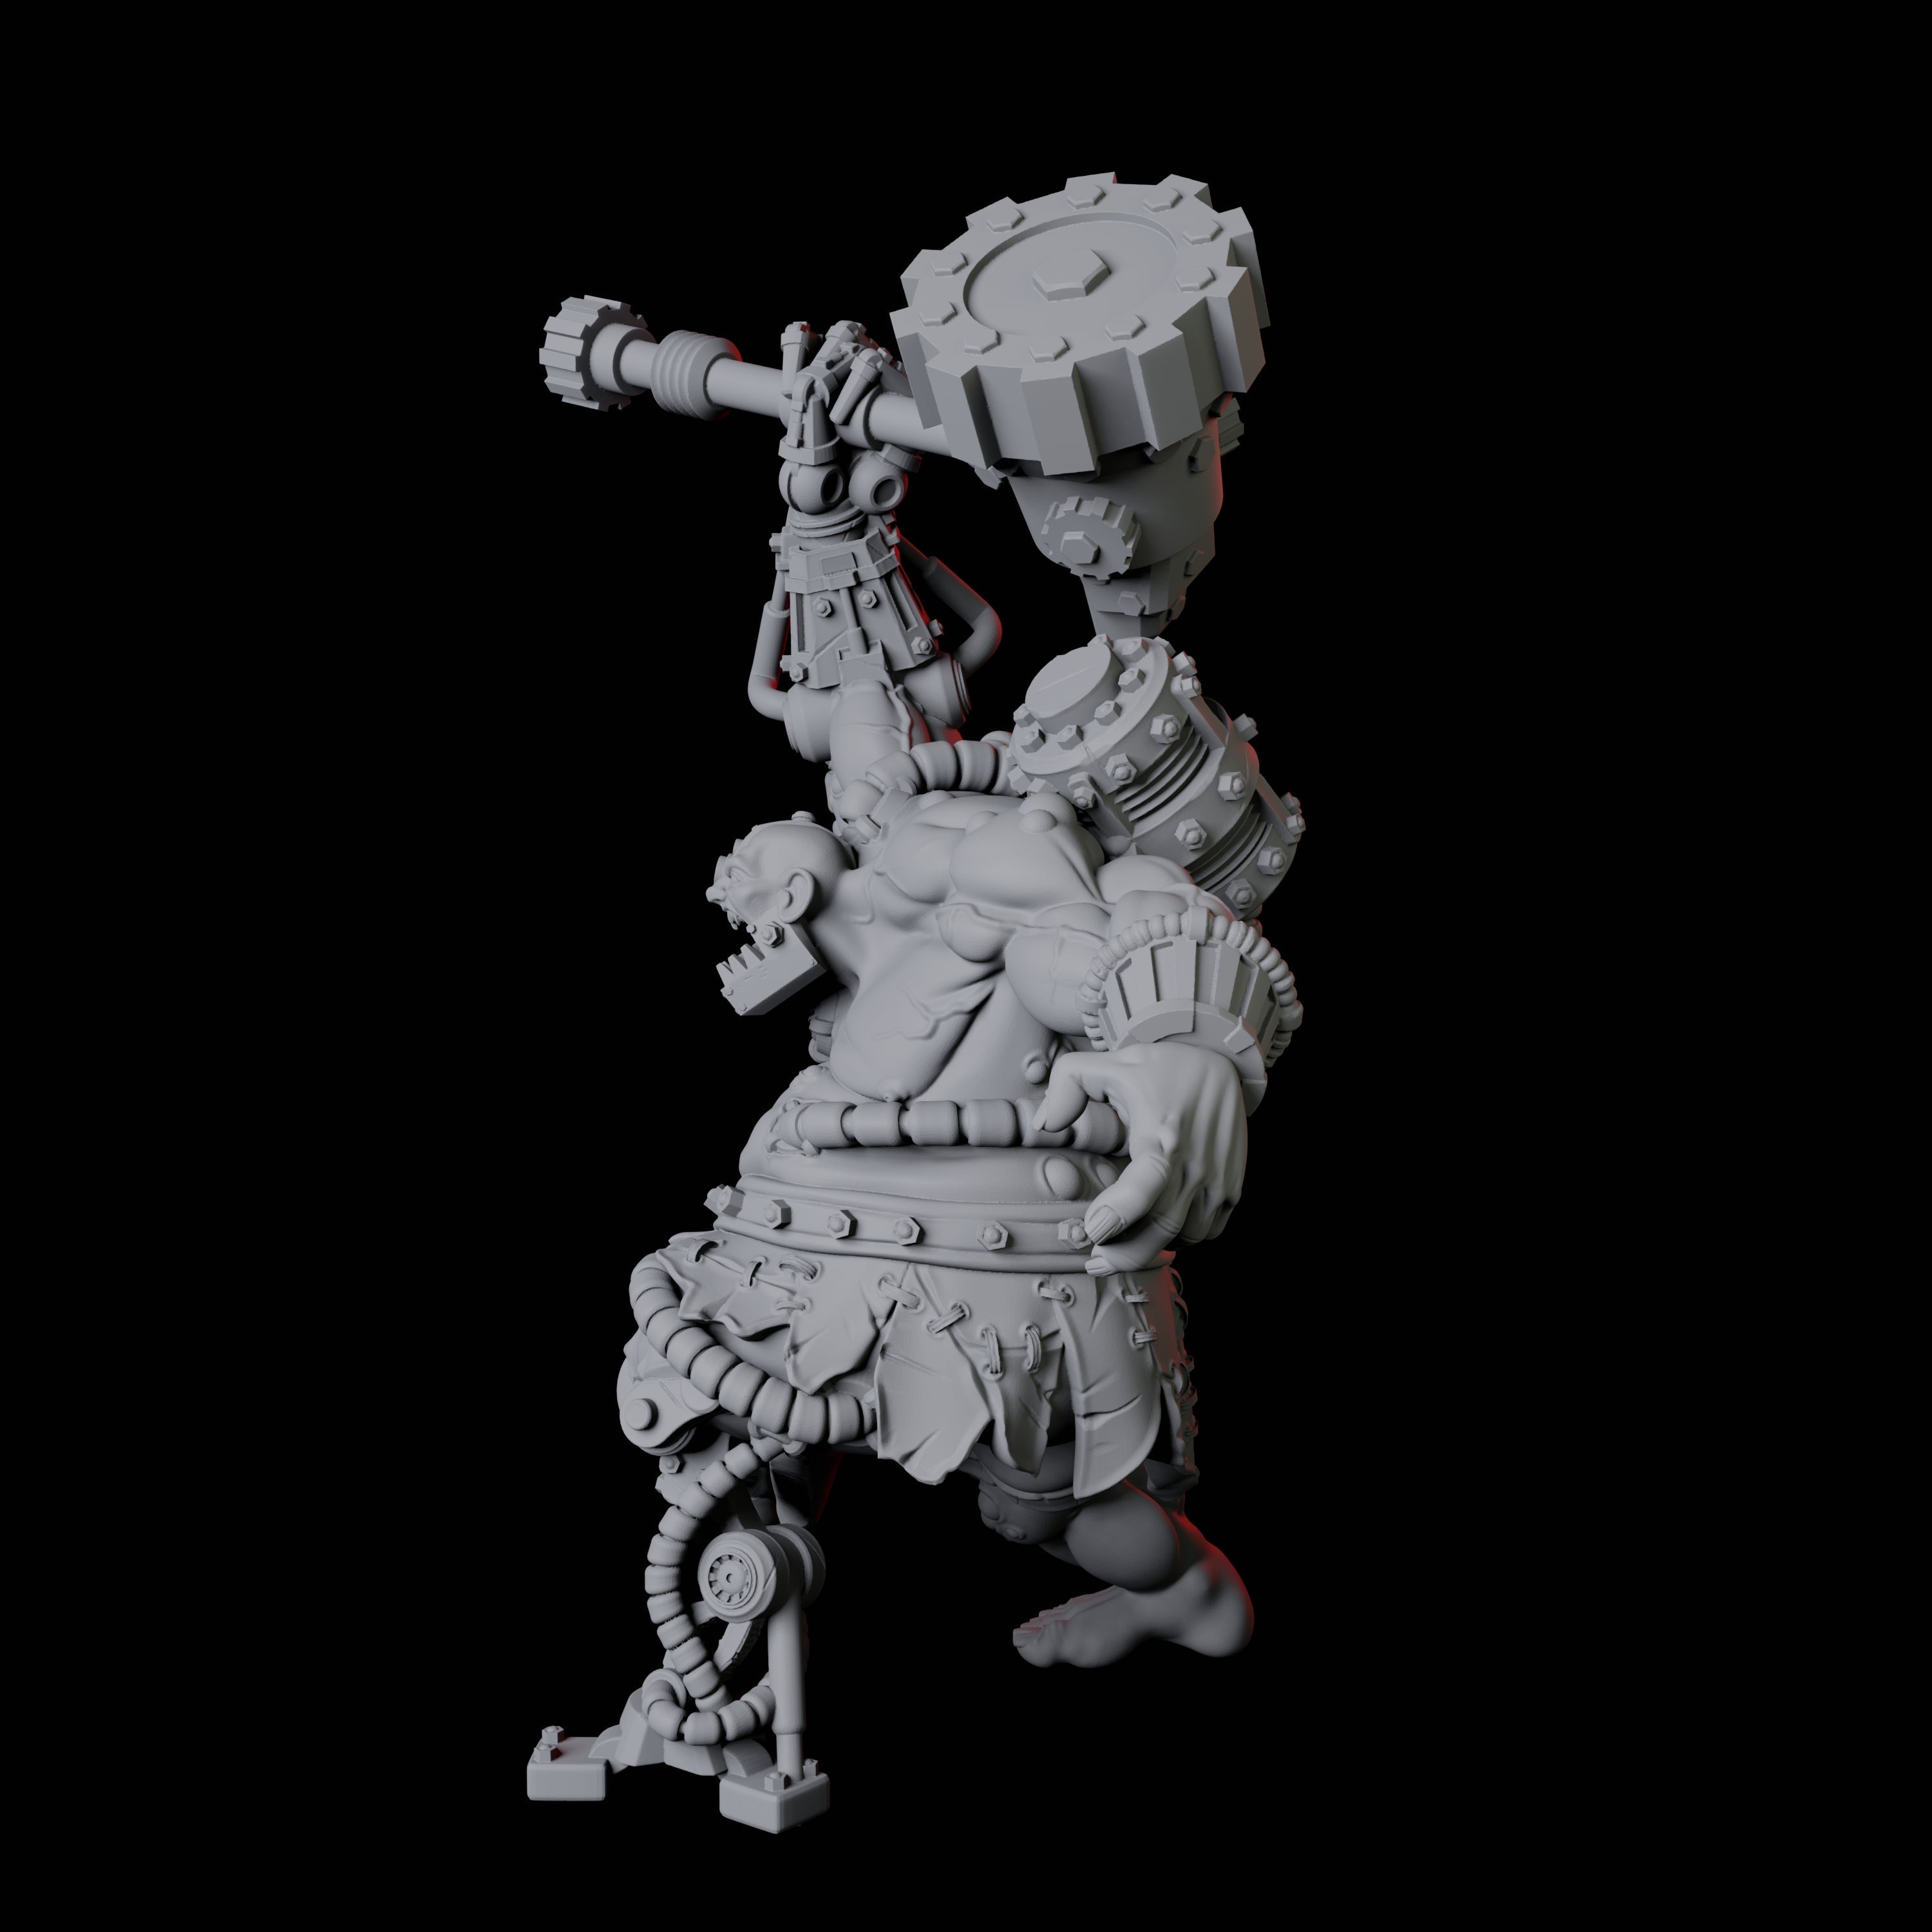 Cyborg Abomination Miniature for Dungeons and Dragons